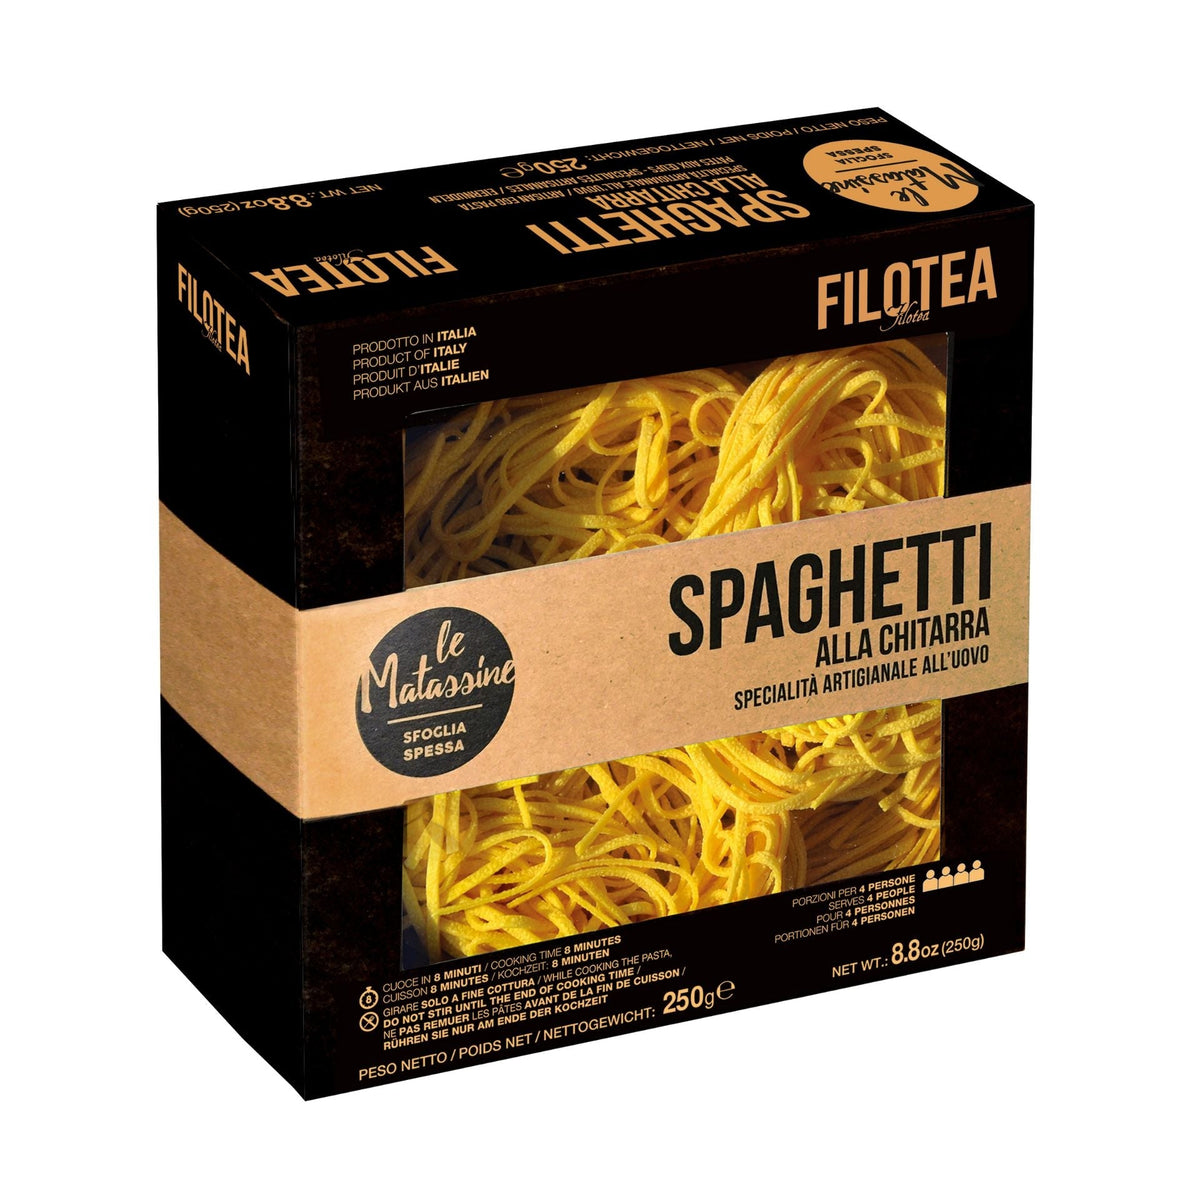 Filotea Le Matassine Spaghetti alla Chitarra Nest Artisan Egg Pasta 250g  | Imported and distributed in the UK by Just Gourmet Foods